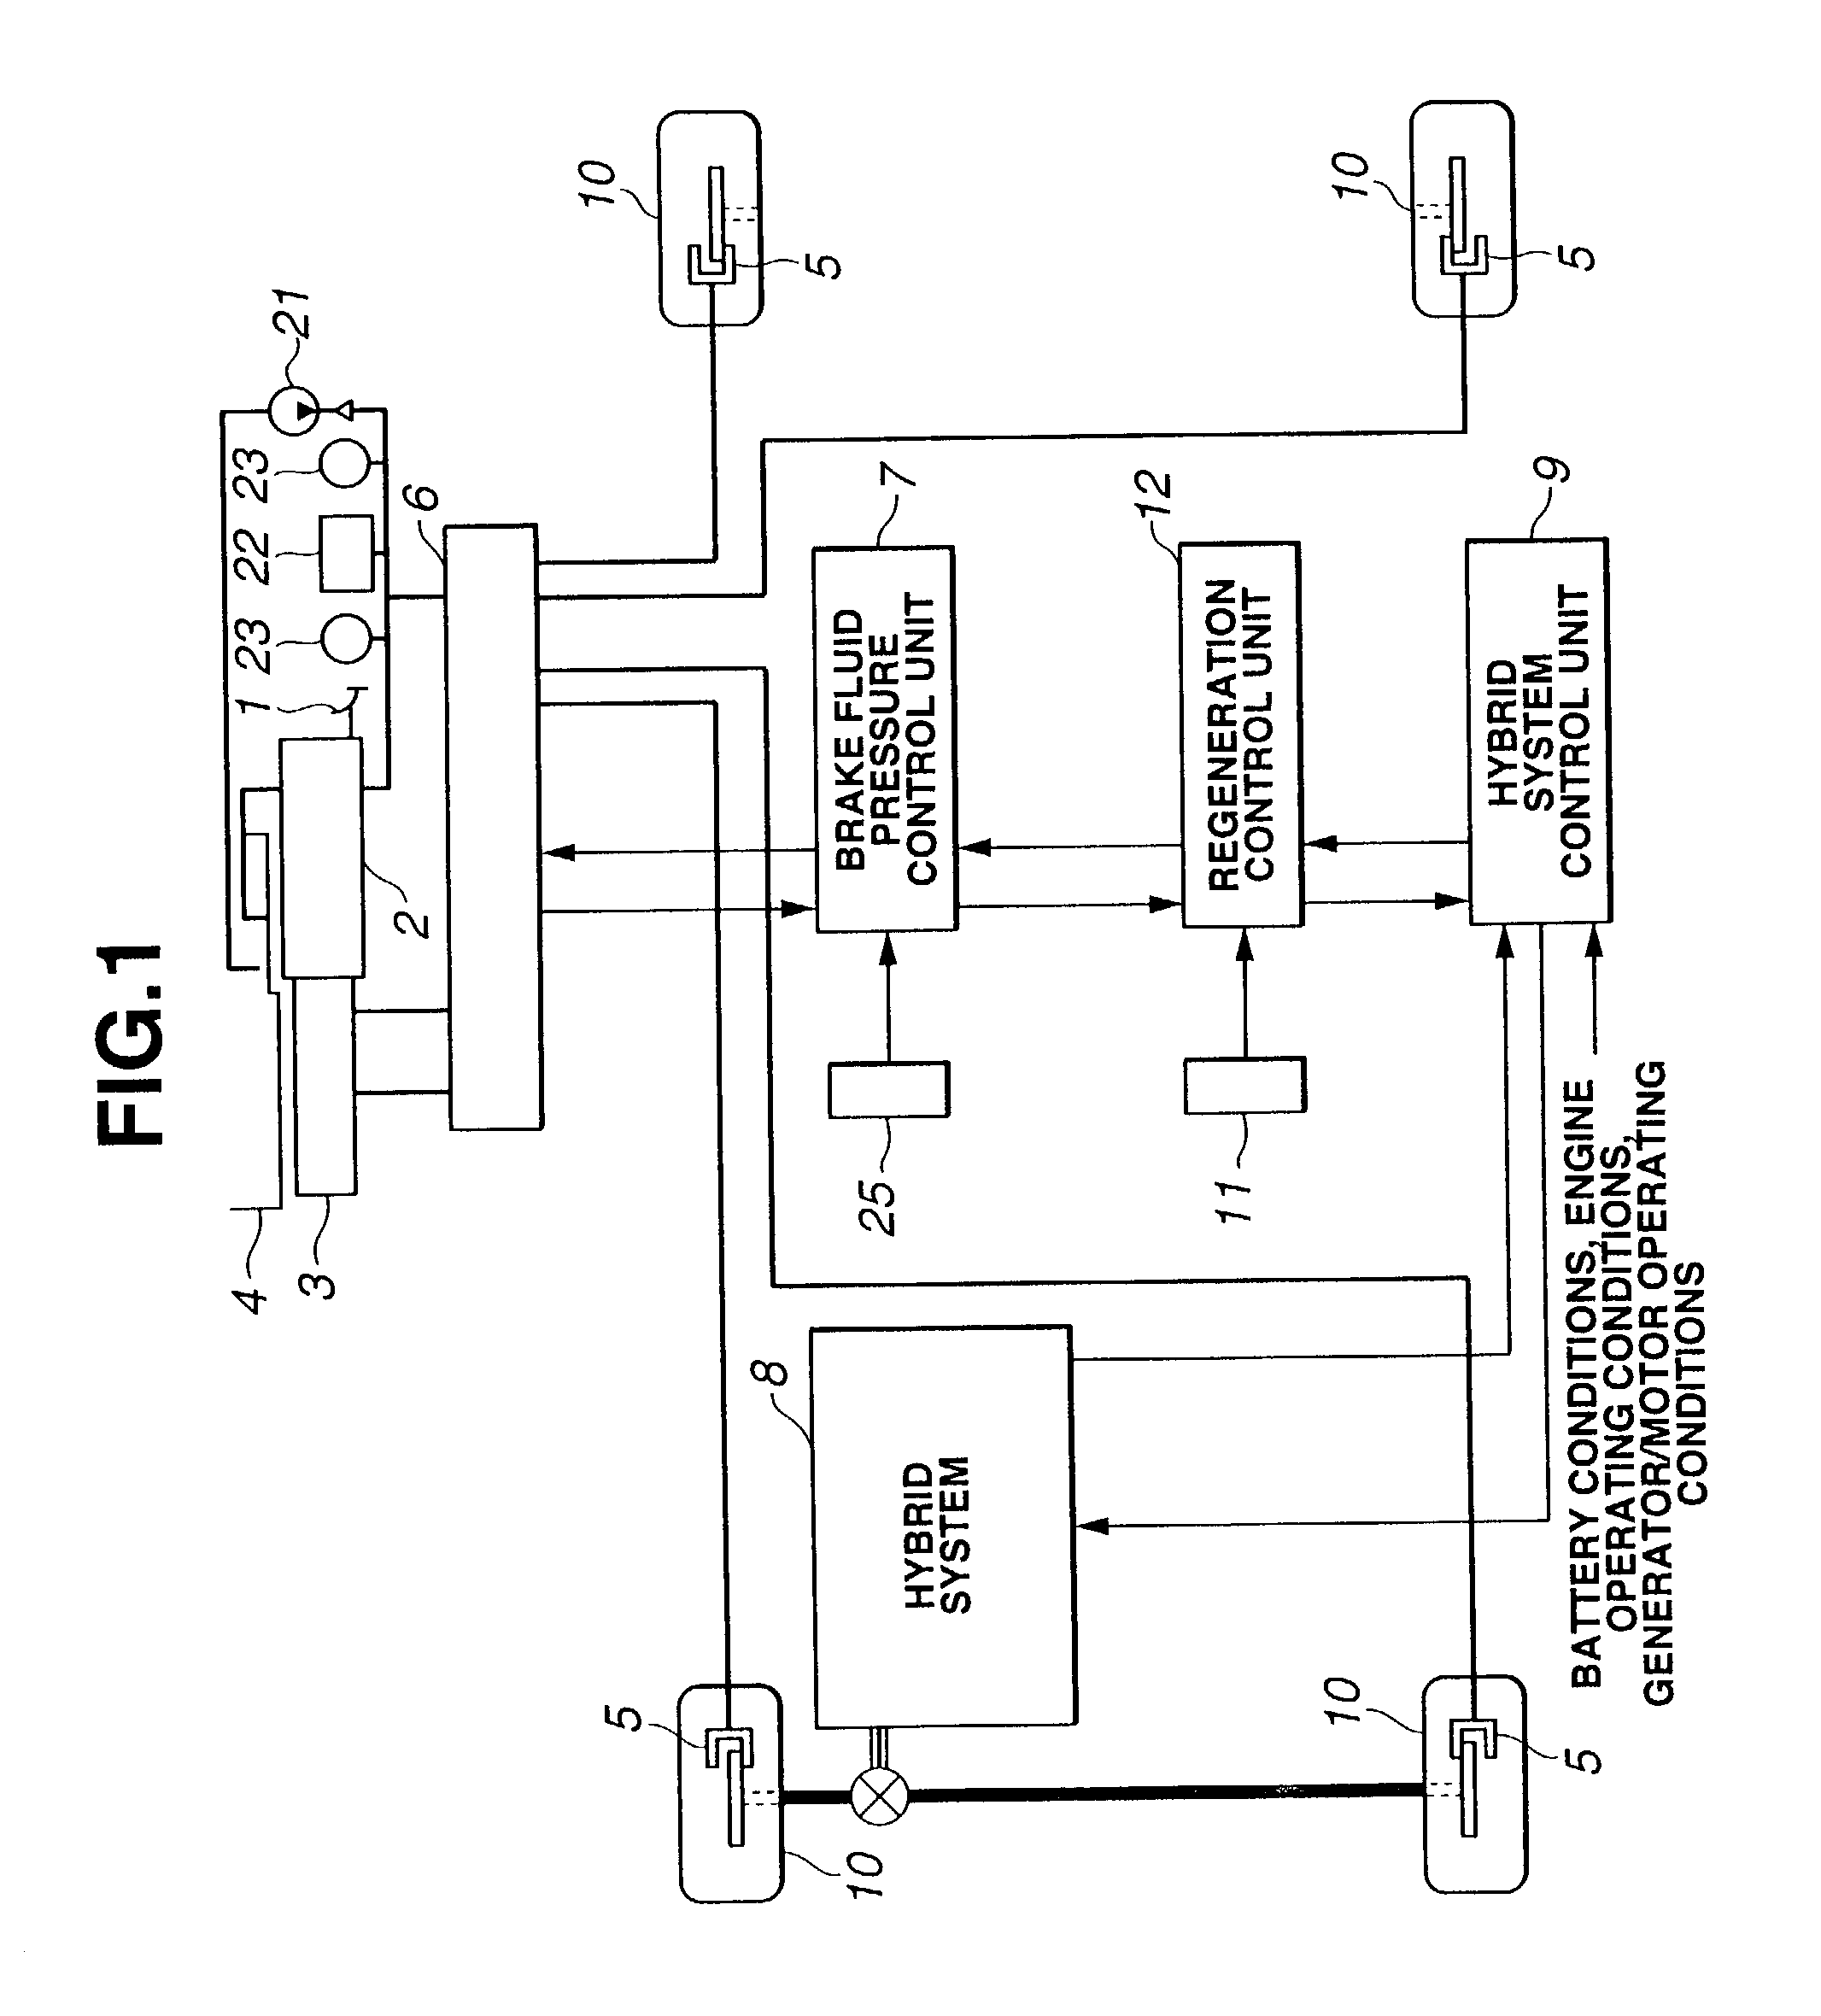 Brake control for vehicle